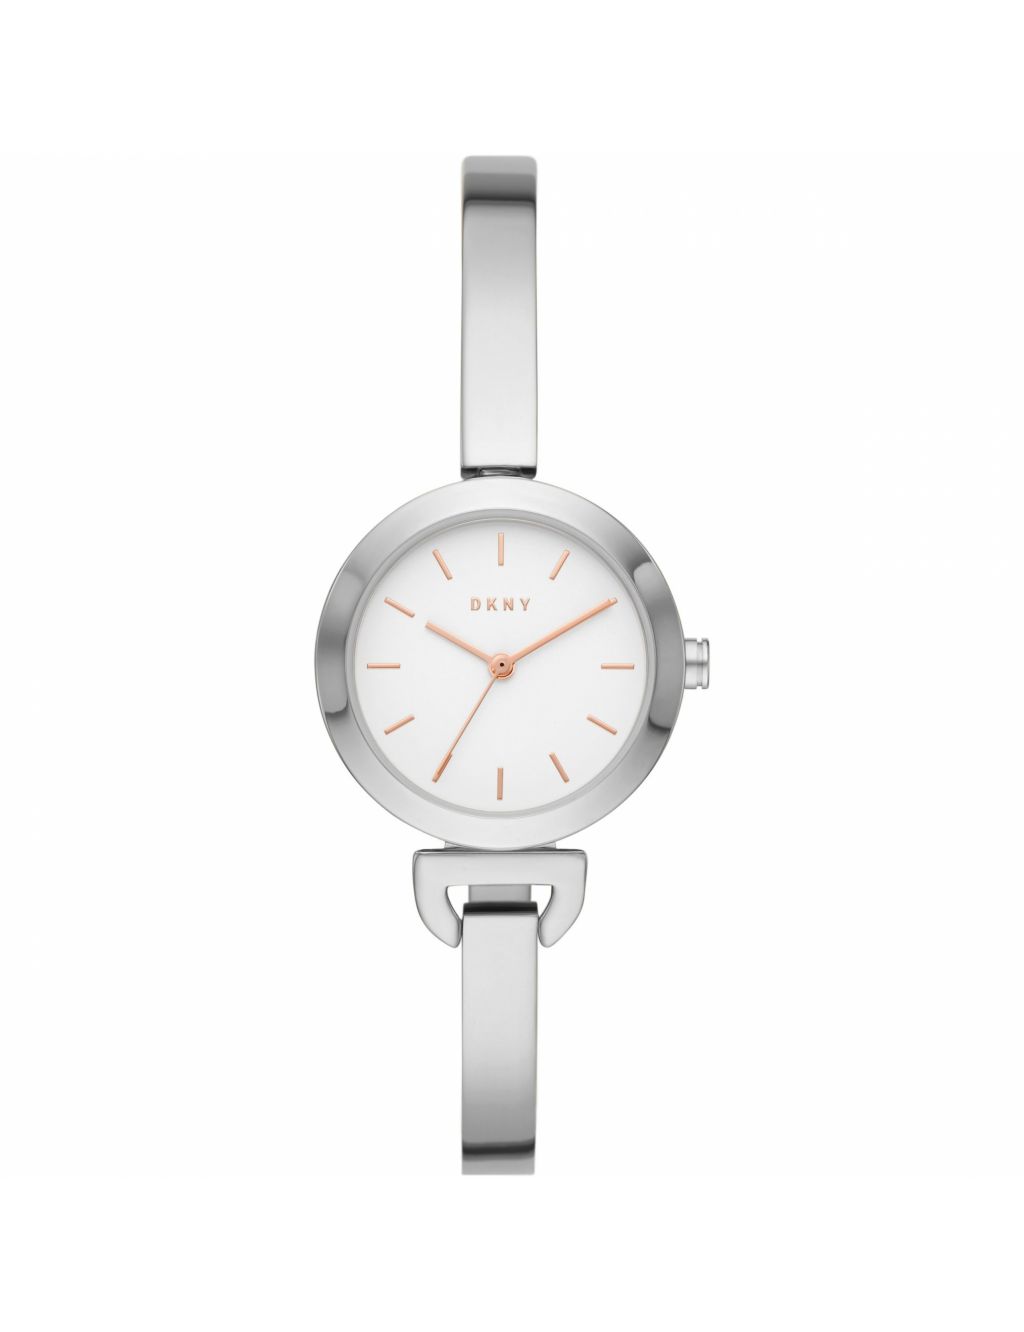 DKNY Uptown Stainless Steel Watch